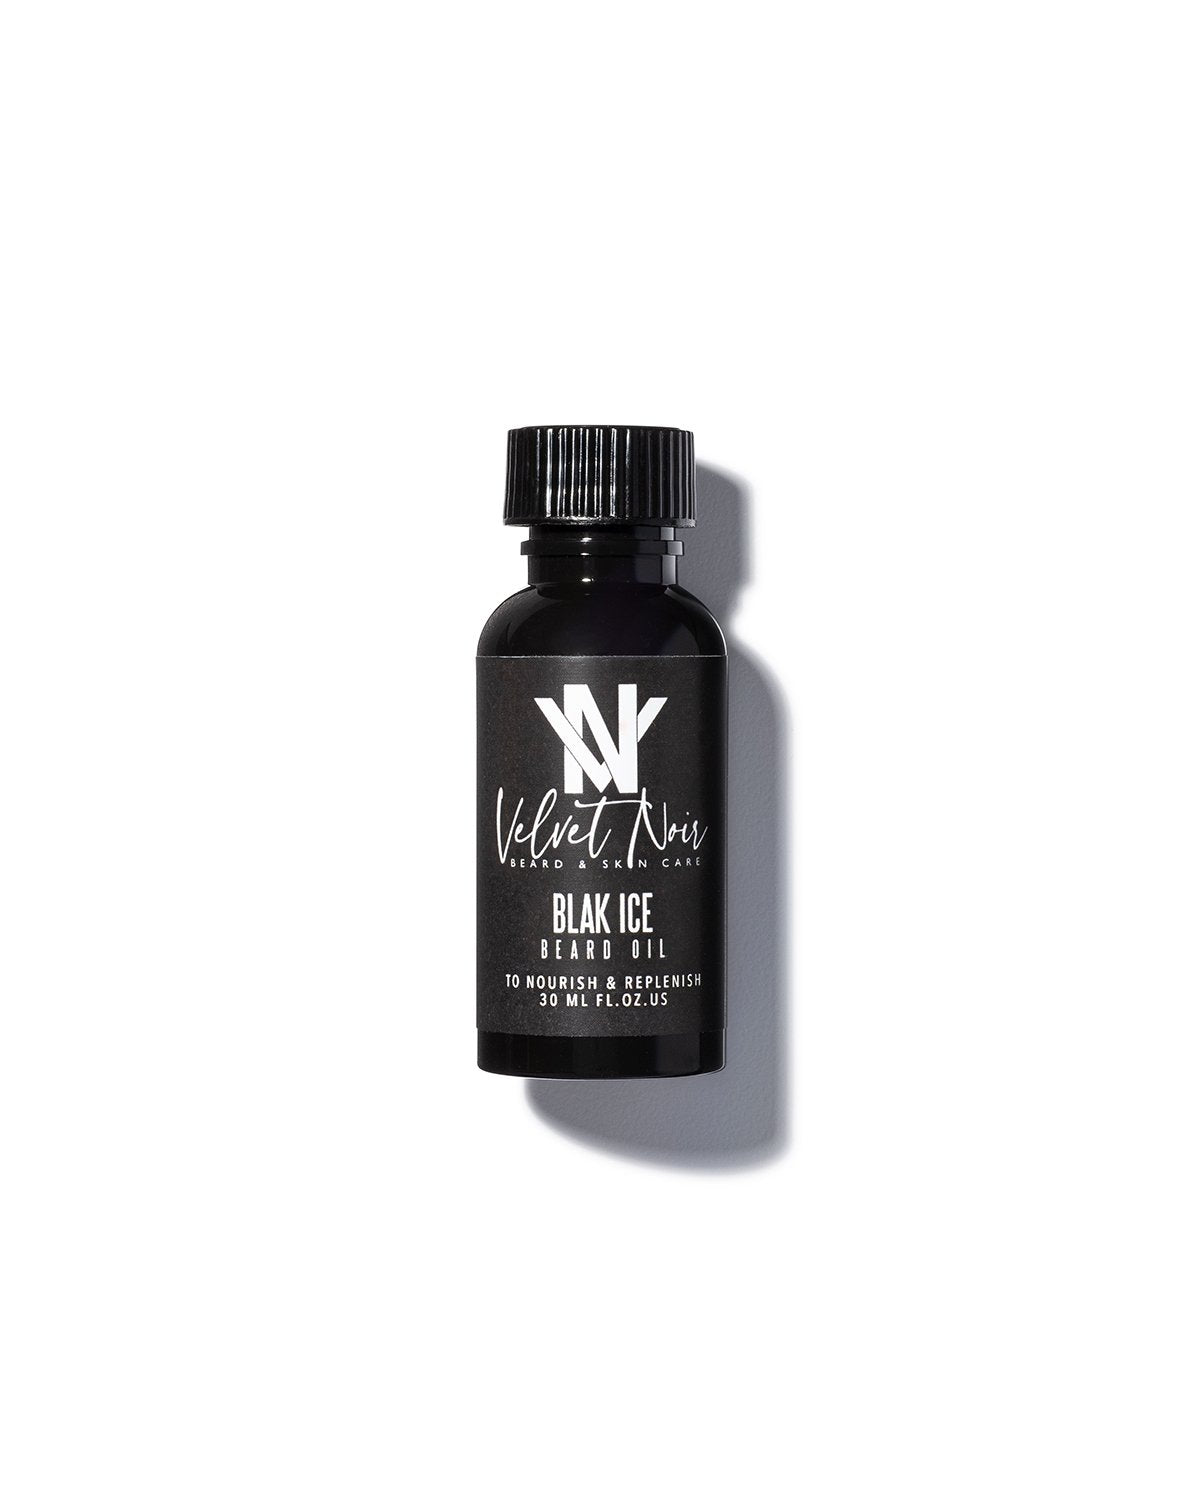 Velvet Noir Black Ice Beard Oil Beauty Supply store, all natural products for men. The wh shop is the sephora for black owned brands